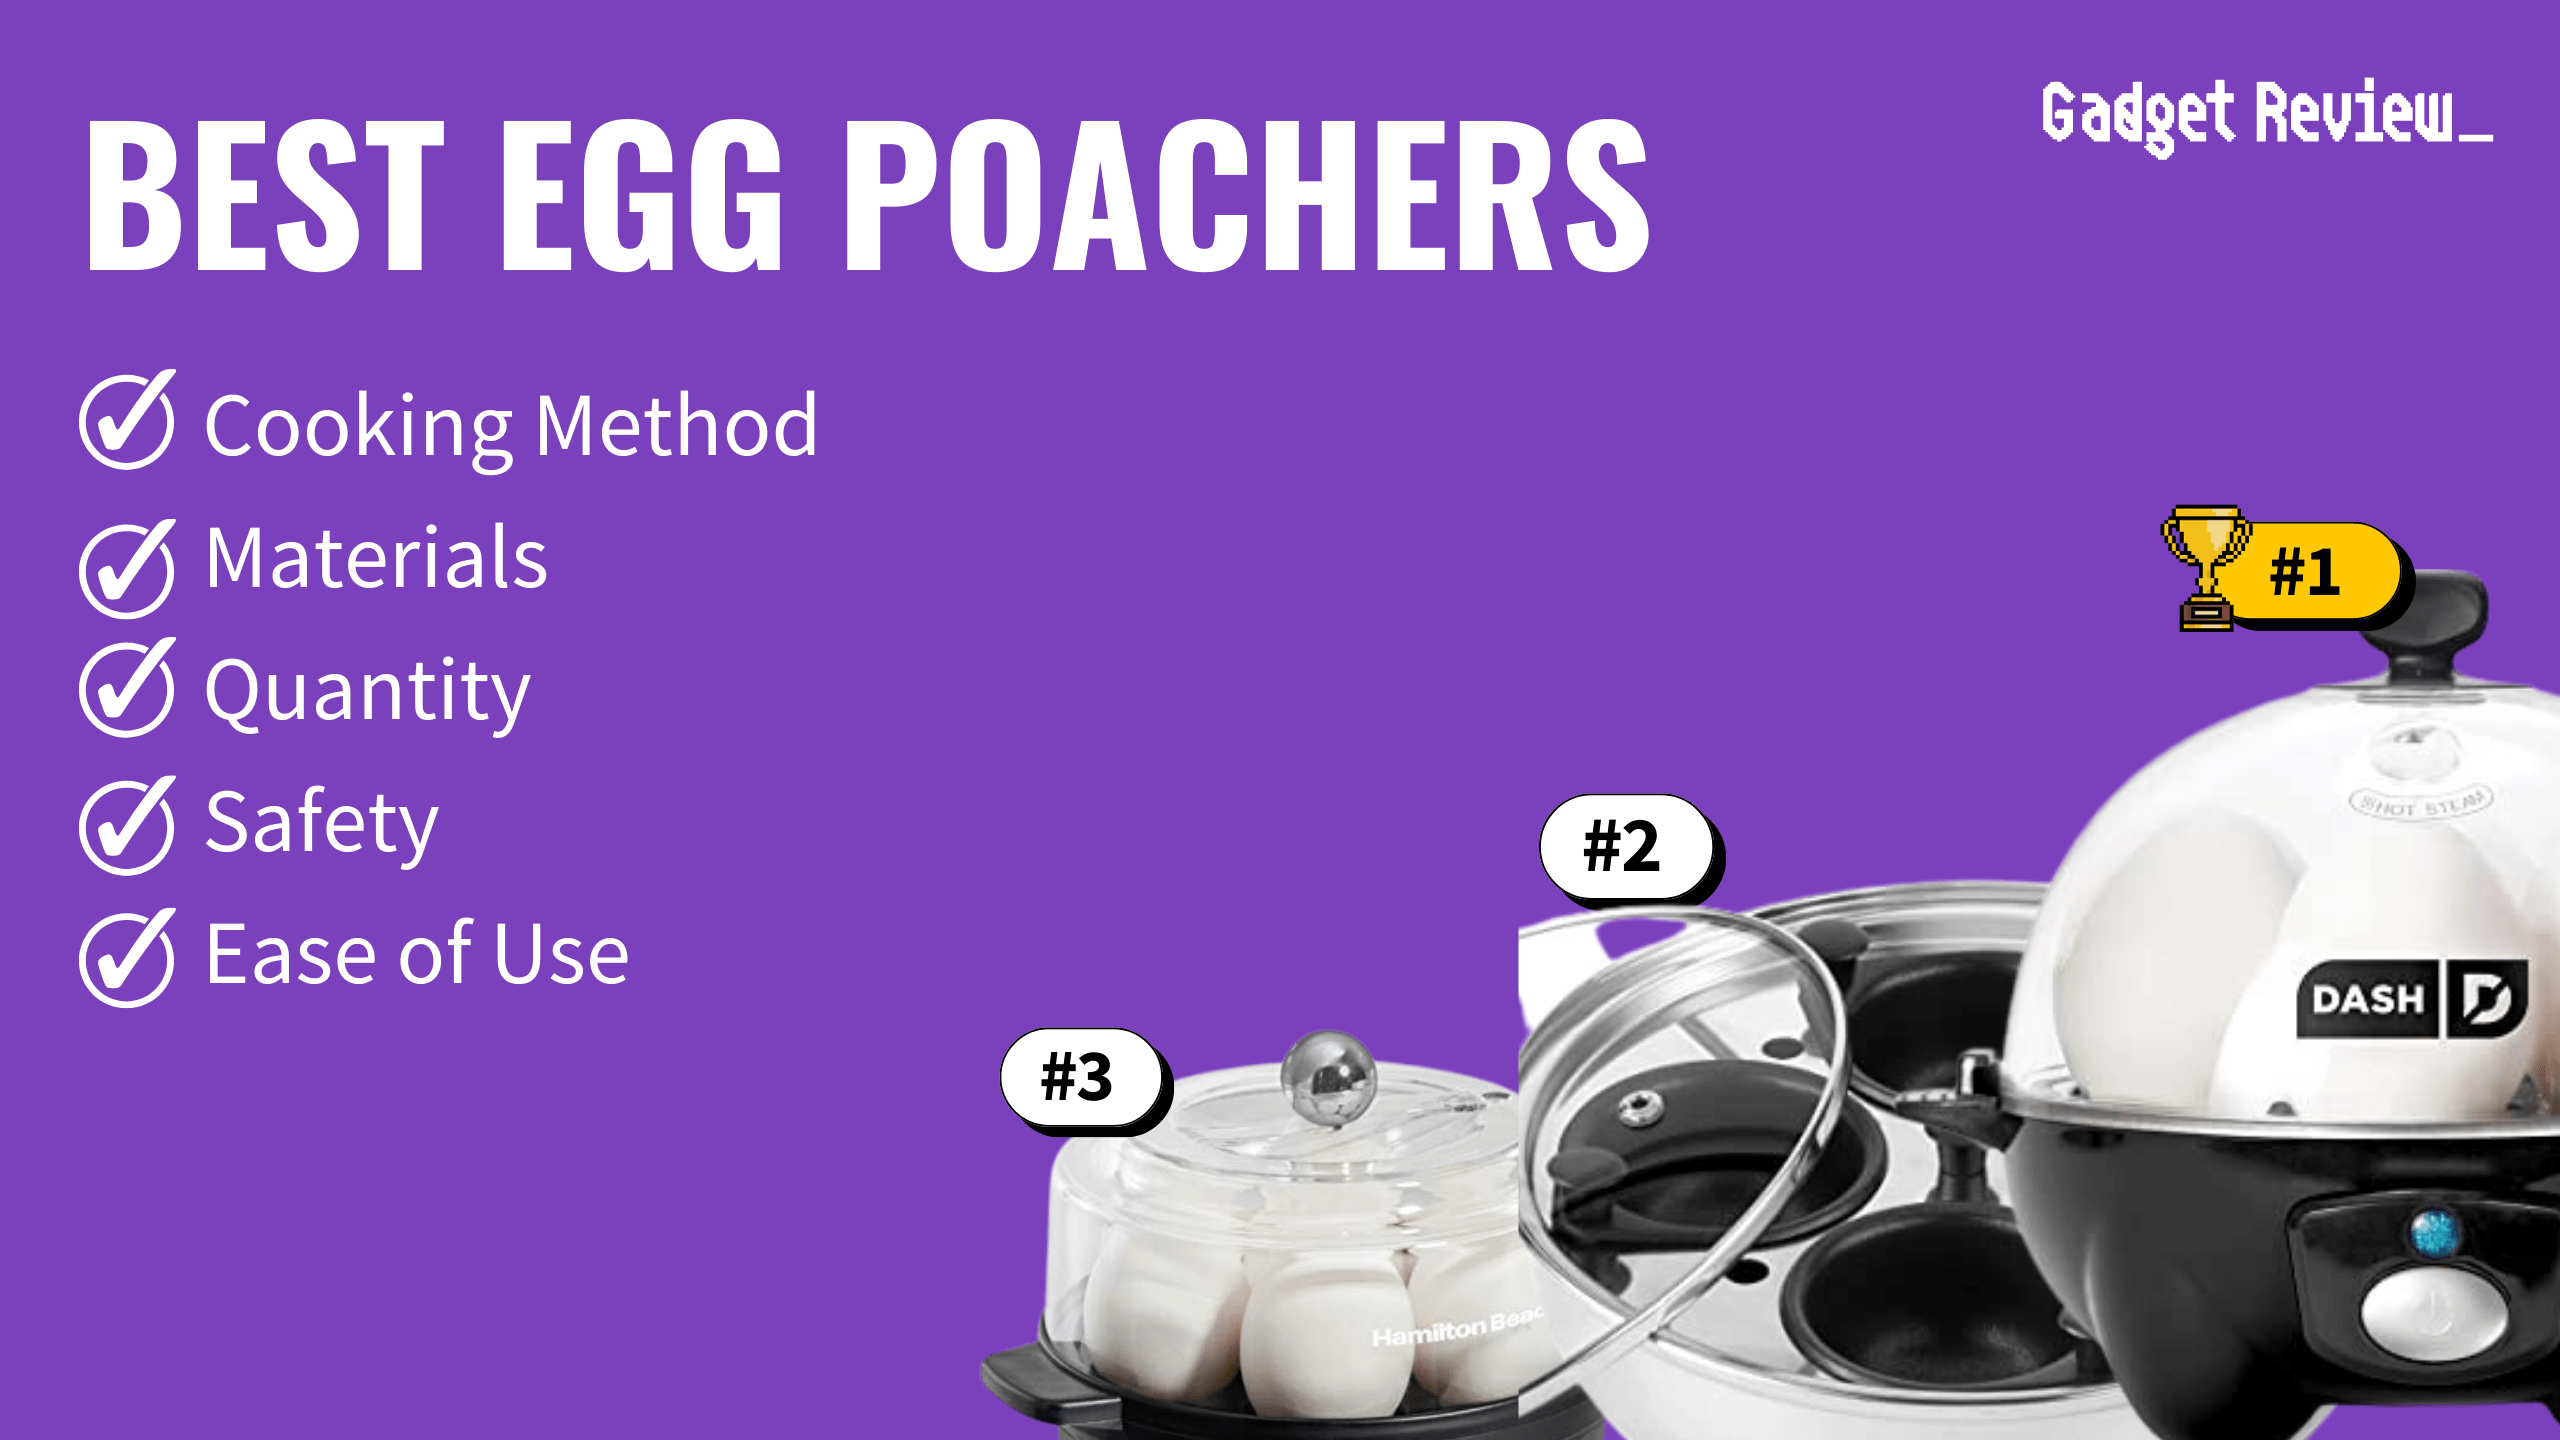 best egg poachers featured image that shows the top three best kitchen product models